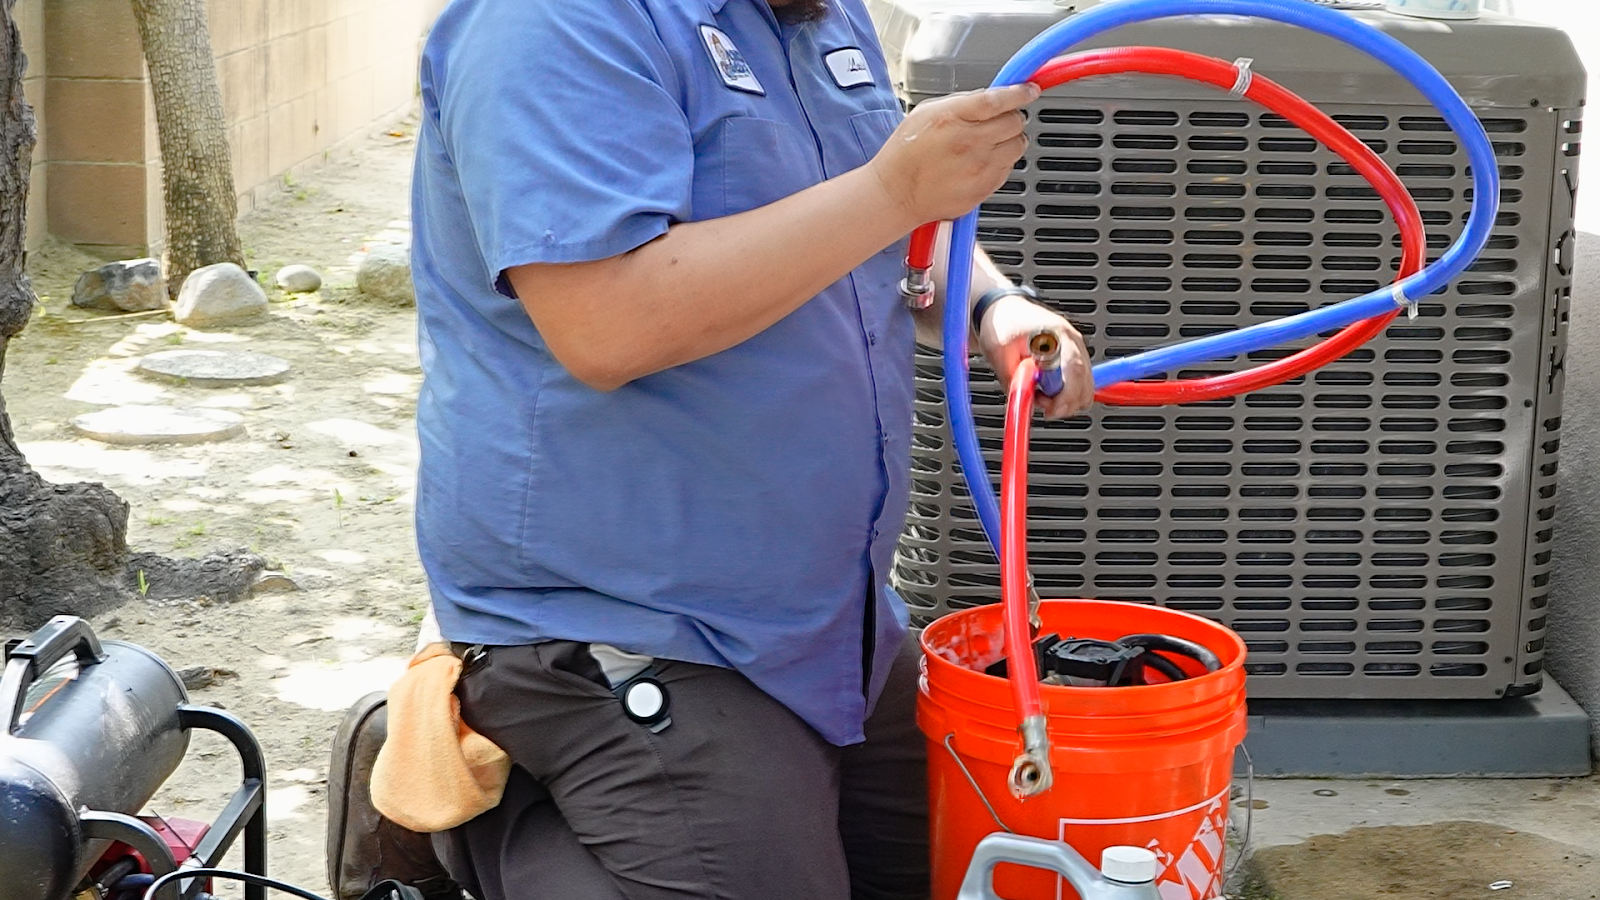 The image shows a Monkey Wrench Plumbing, Heating & Air technician kneeling down preparing equipment required for a tankless water heater flush. 